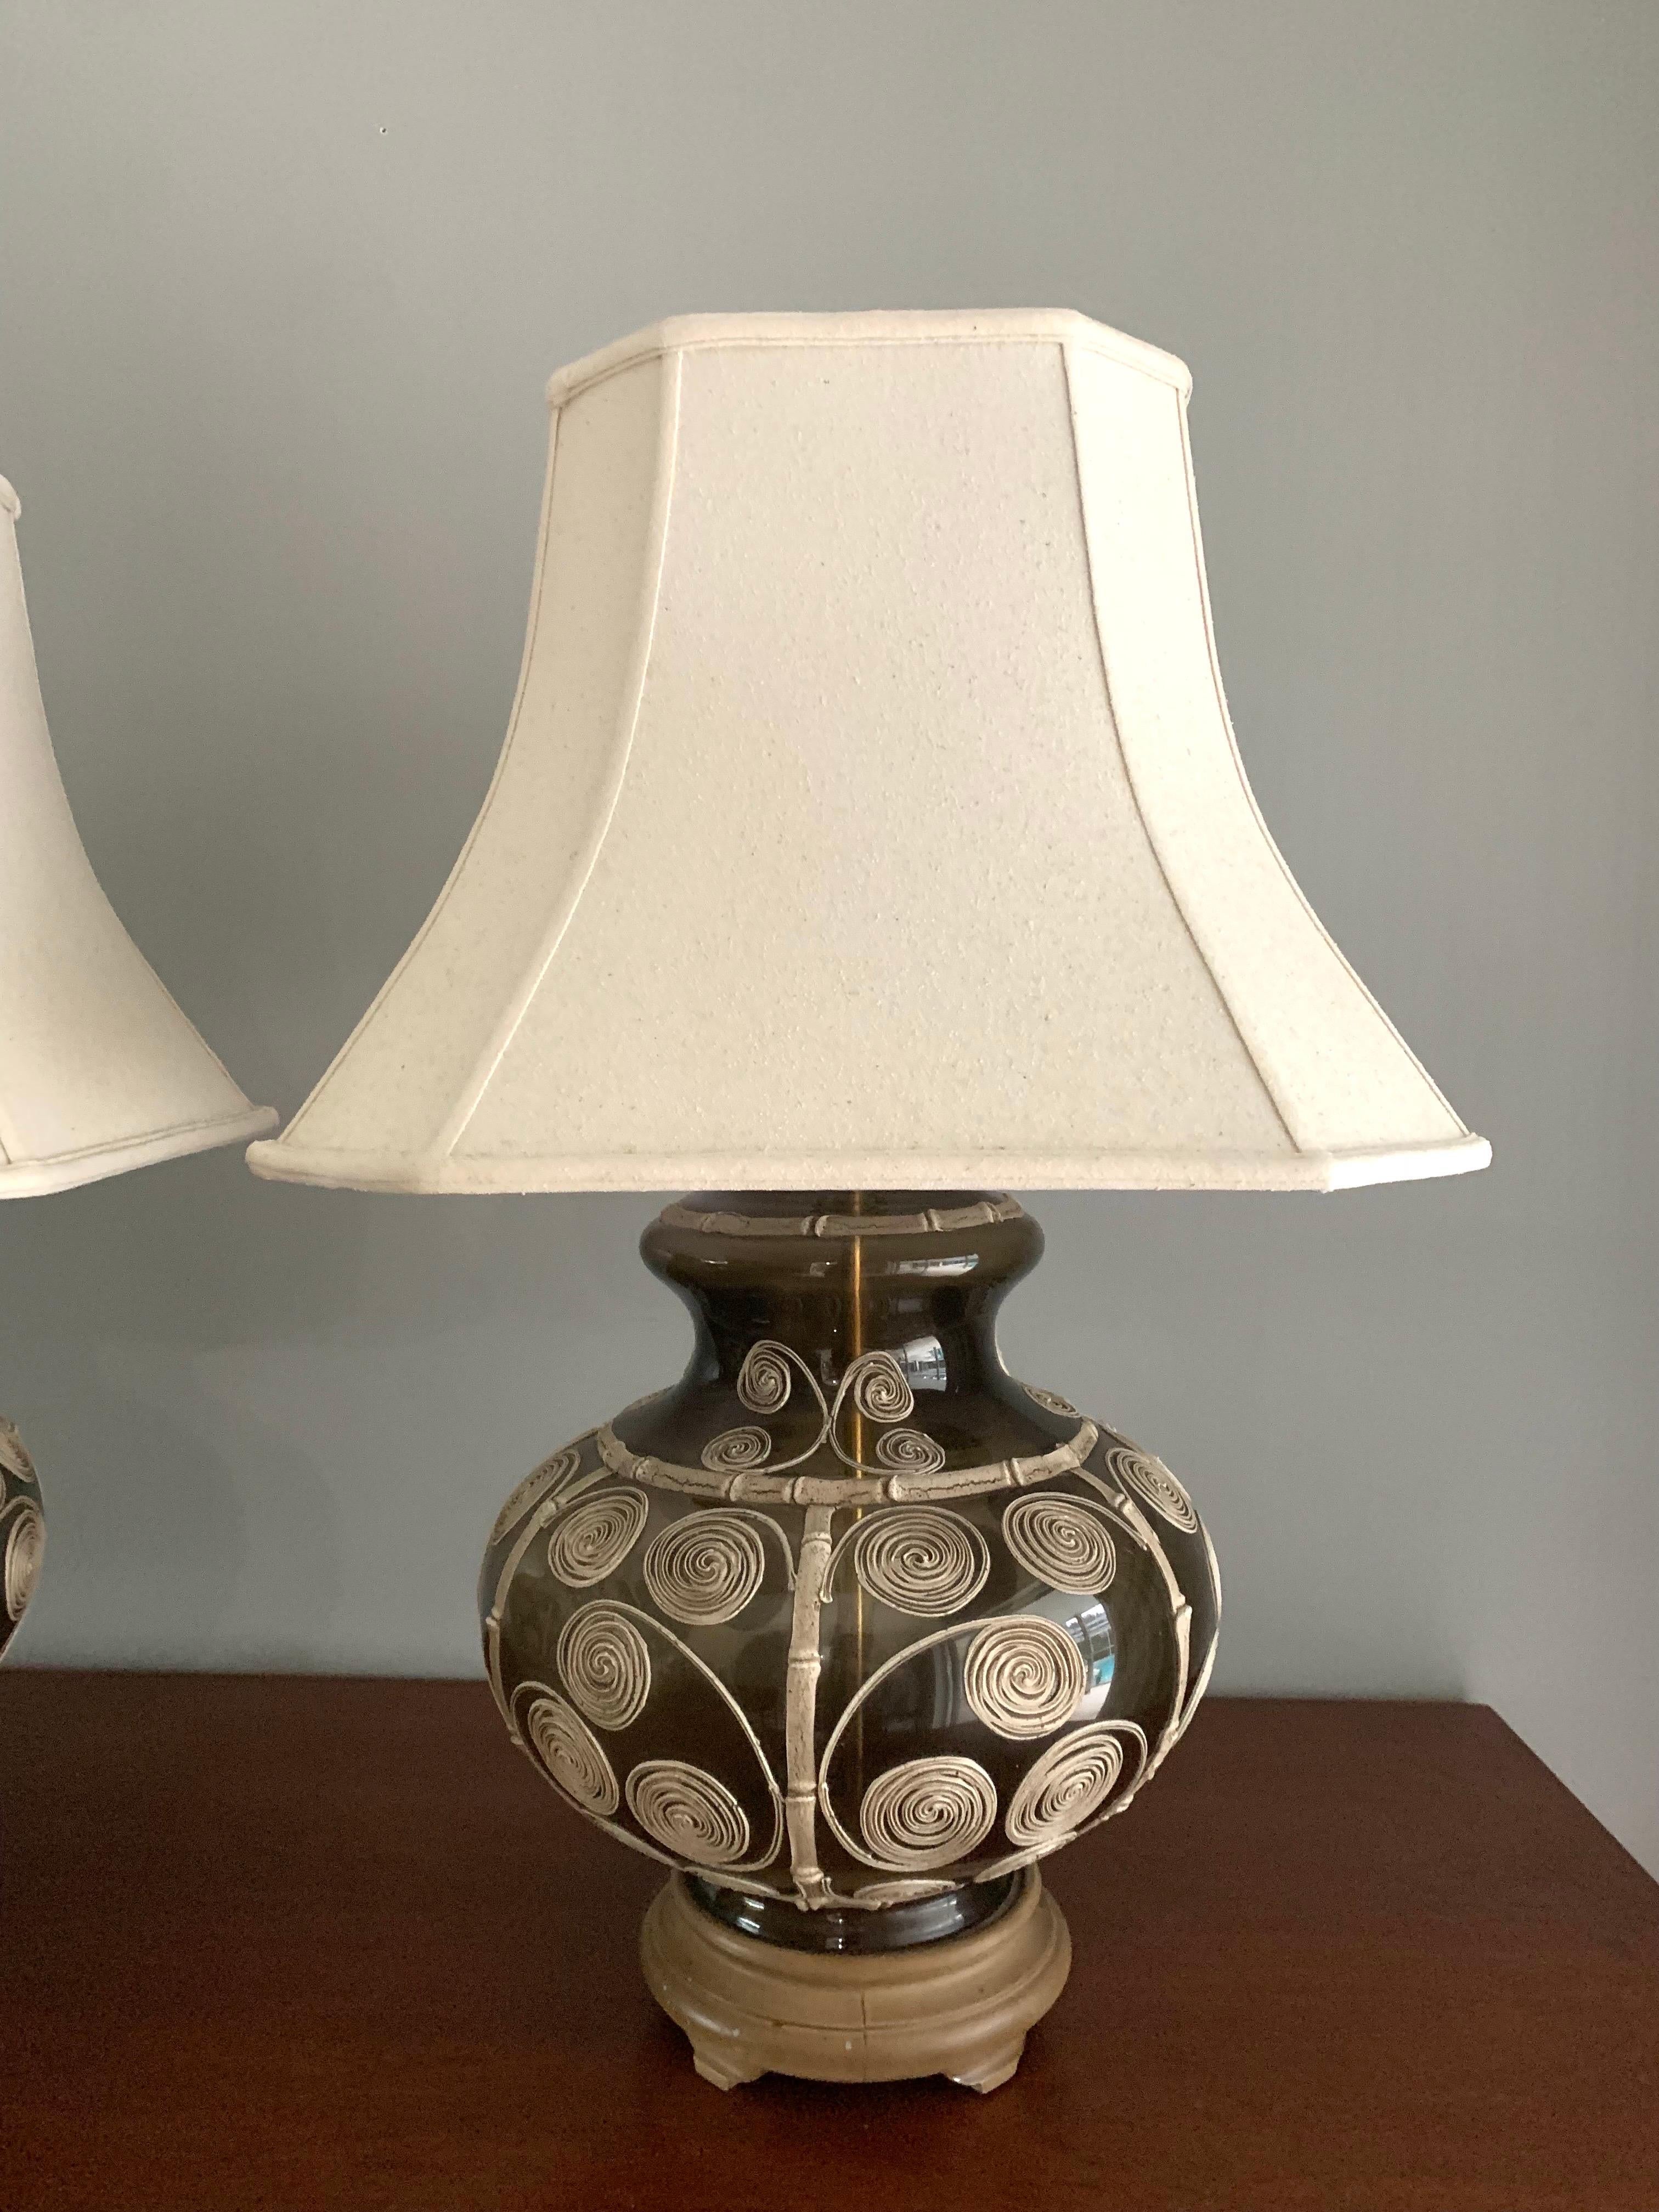 Pair of greenish brown glass ginger jar form lamps with beautifully detailed faux bamboo ceramic accents. 

Hand crafted patterns create a beautiful contrast on the glass and add great dimensions to the lamps. 

Both lamps are in working